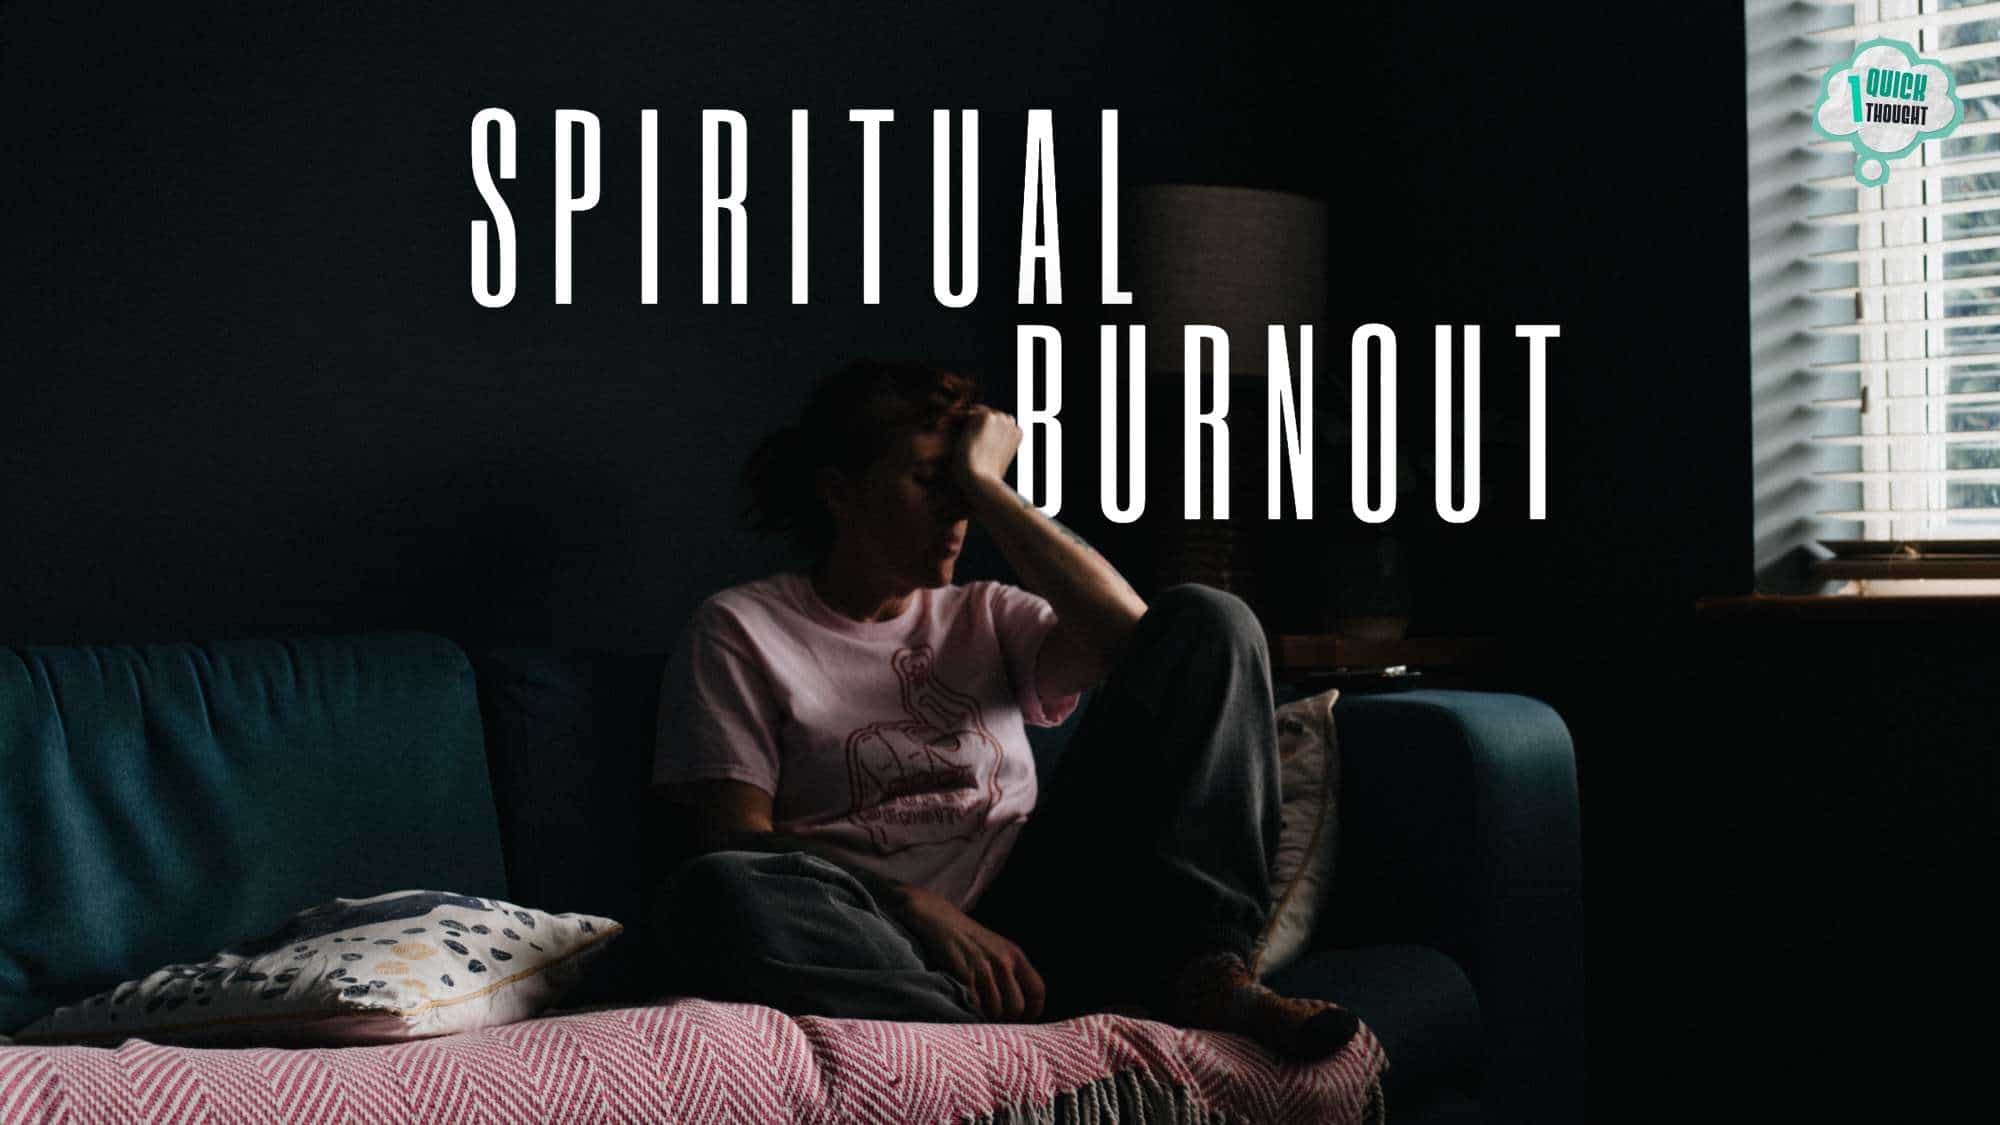 One Quick Thought: How to Get Out of a Spiritual Burnout 59